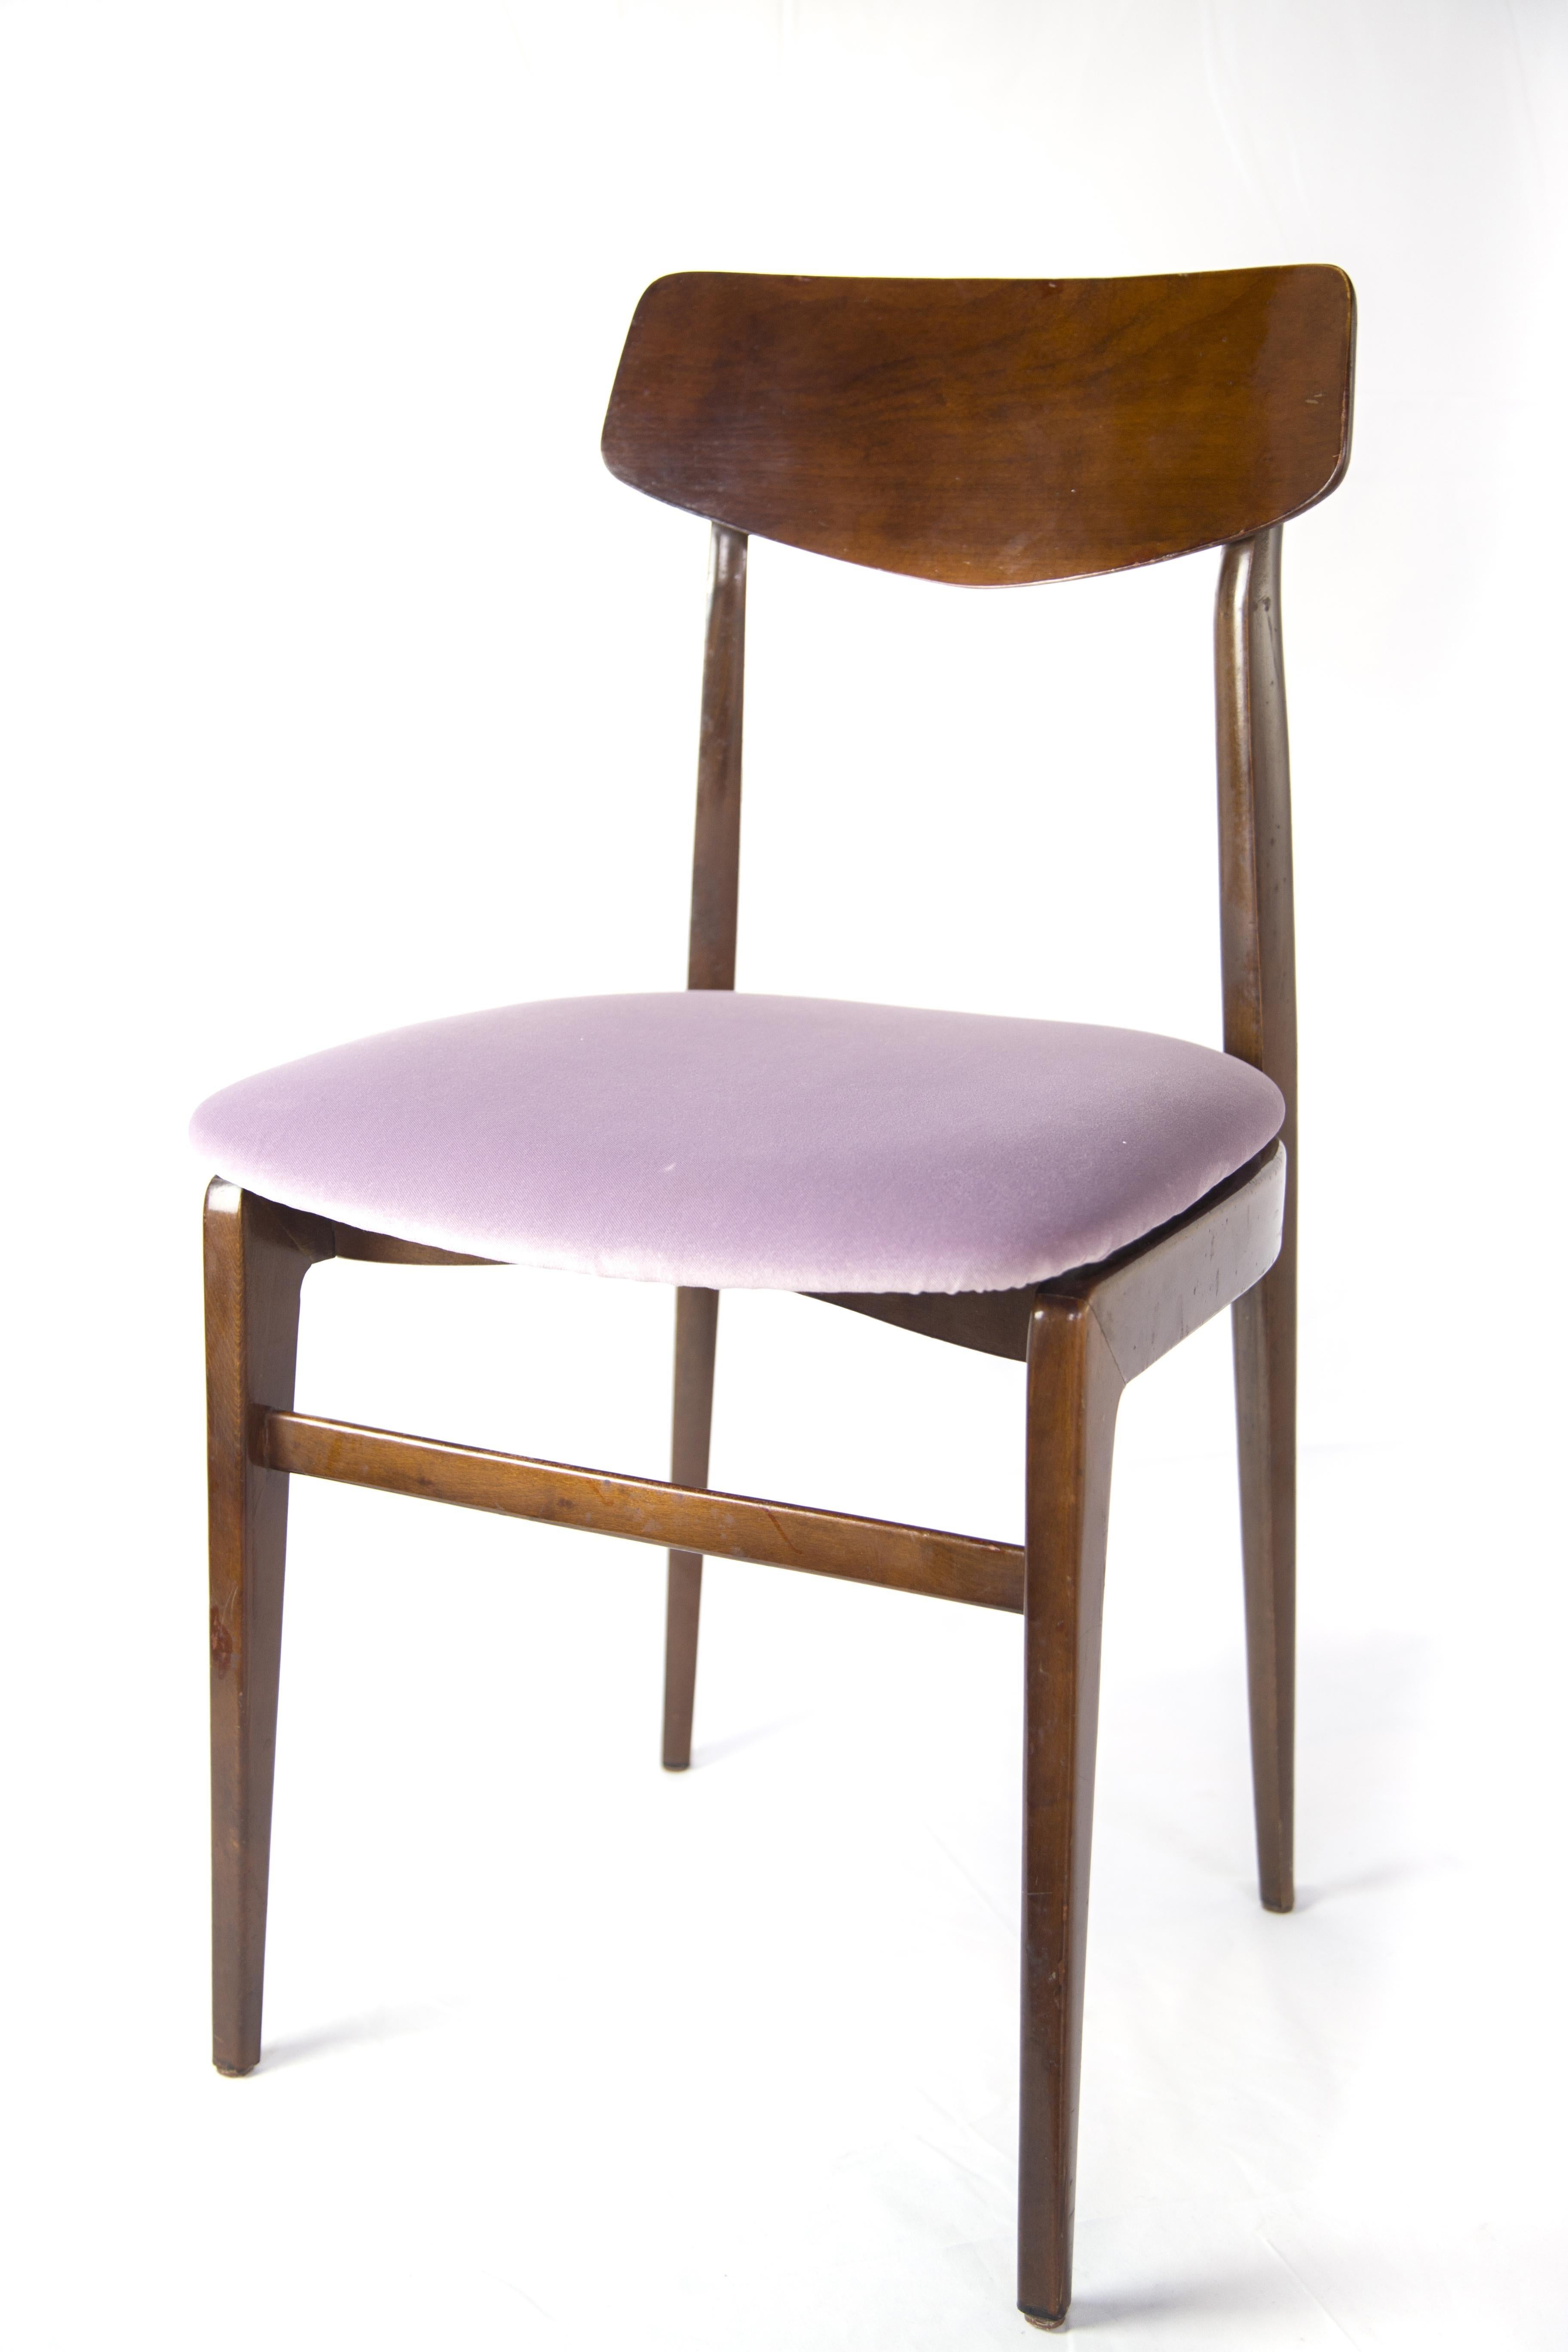 Hand-Crafted Set of 2 Teak Dining Chairs with Velvet Seat, Scandinavian Design, 1960s For Sale